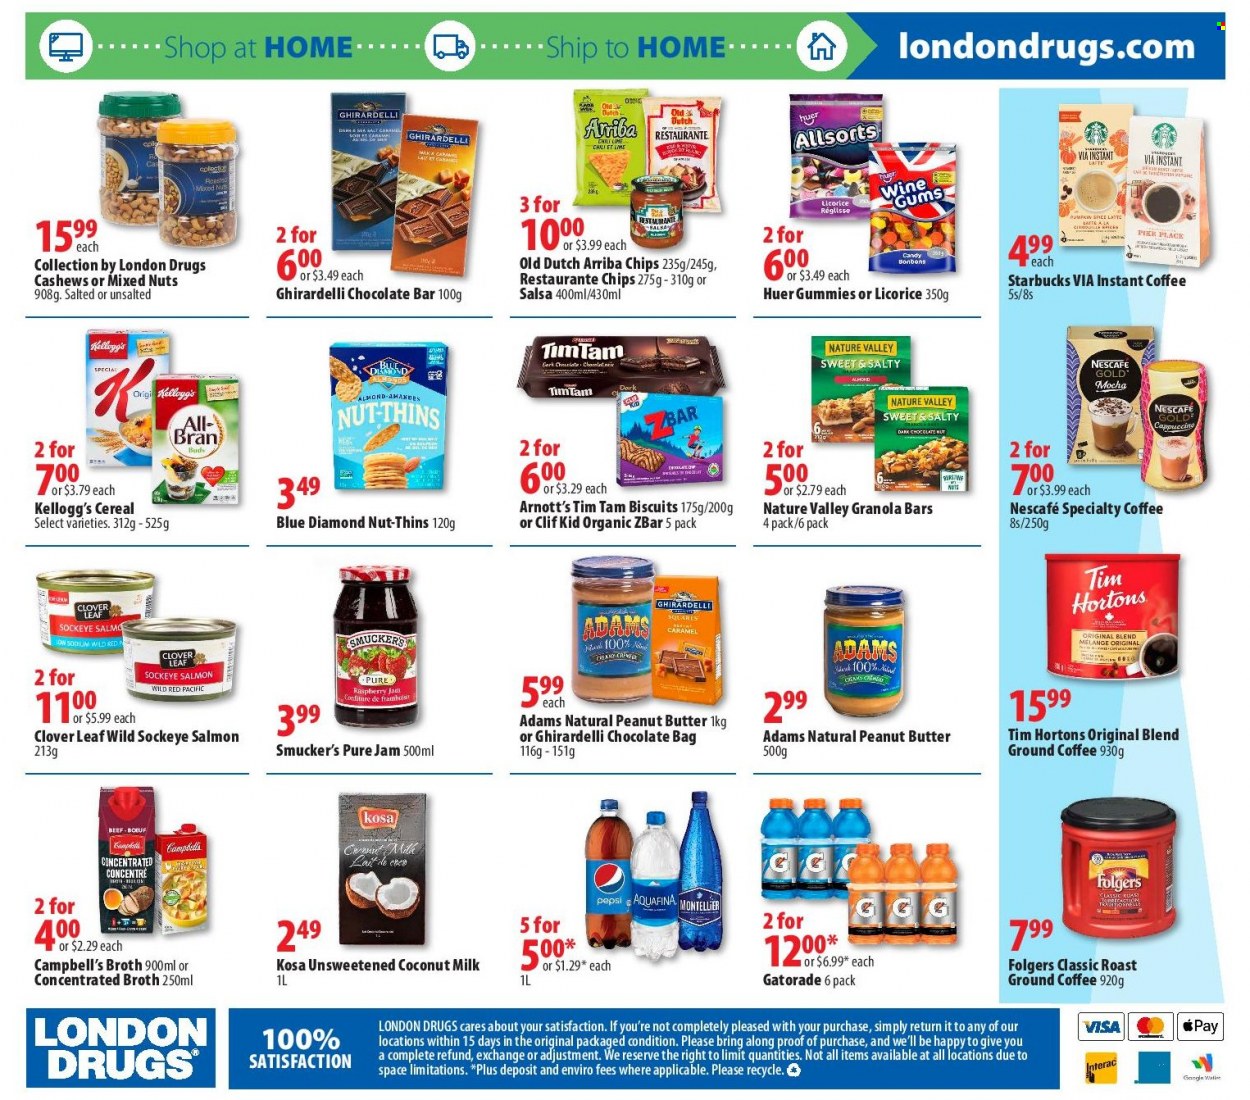 thumbnail - London Drugs Flyer - September 24, 2021 - September 29, 2021 - Sales products - Tim Tam, Kellogg's, biscuit, dark chocolate, Ghirardelli, chocolate bar, Thins, broth, coconut milk, salmon, cereals, granola bar, Nature Valley, All-Bran, Campbell's, salsa, fruit jam, peanut butter, cashews, mixed nuts, Blue Diamond, Pepsi, Clover, Gatorade, Aquafina, instant coffee, Folgers, ground coffee, Starbucks, bag, chips, Nescafé. Page 16.